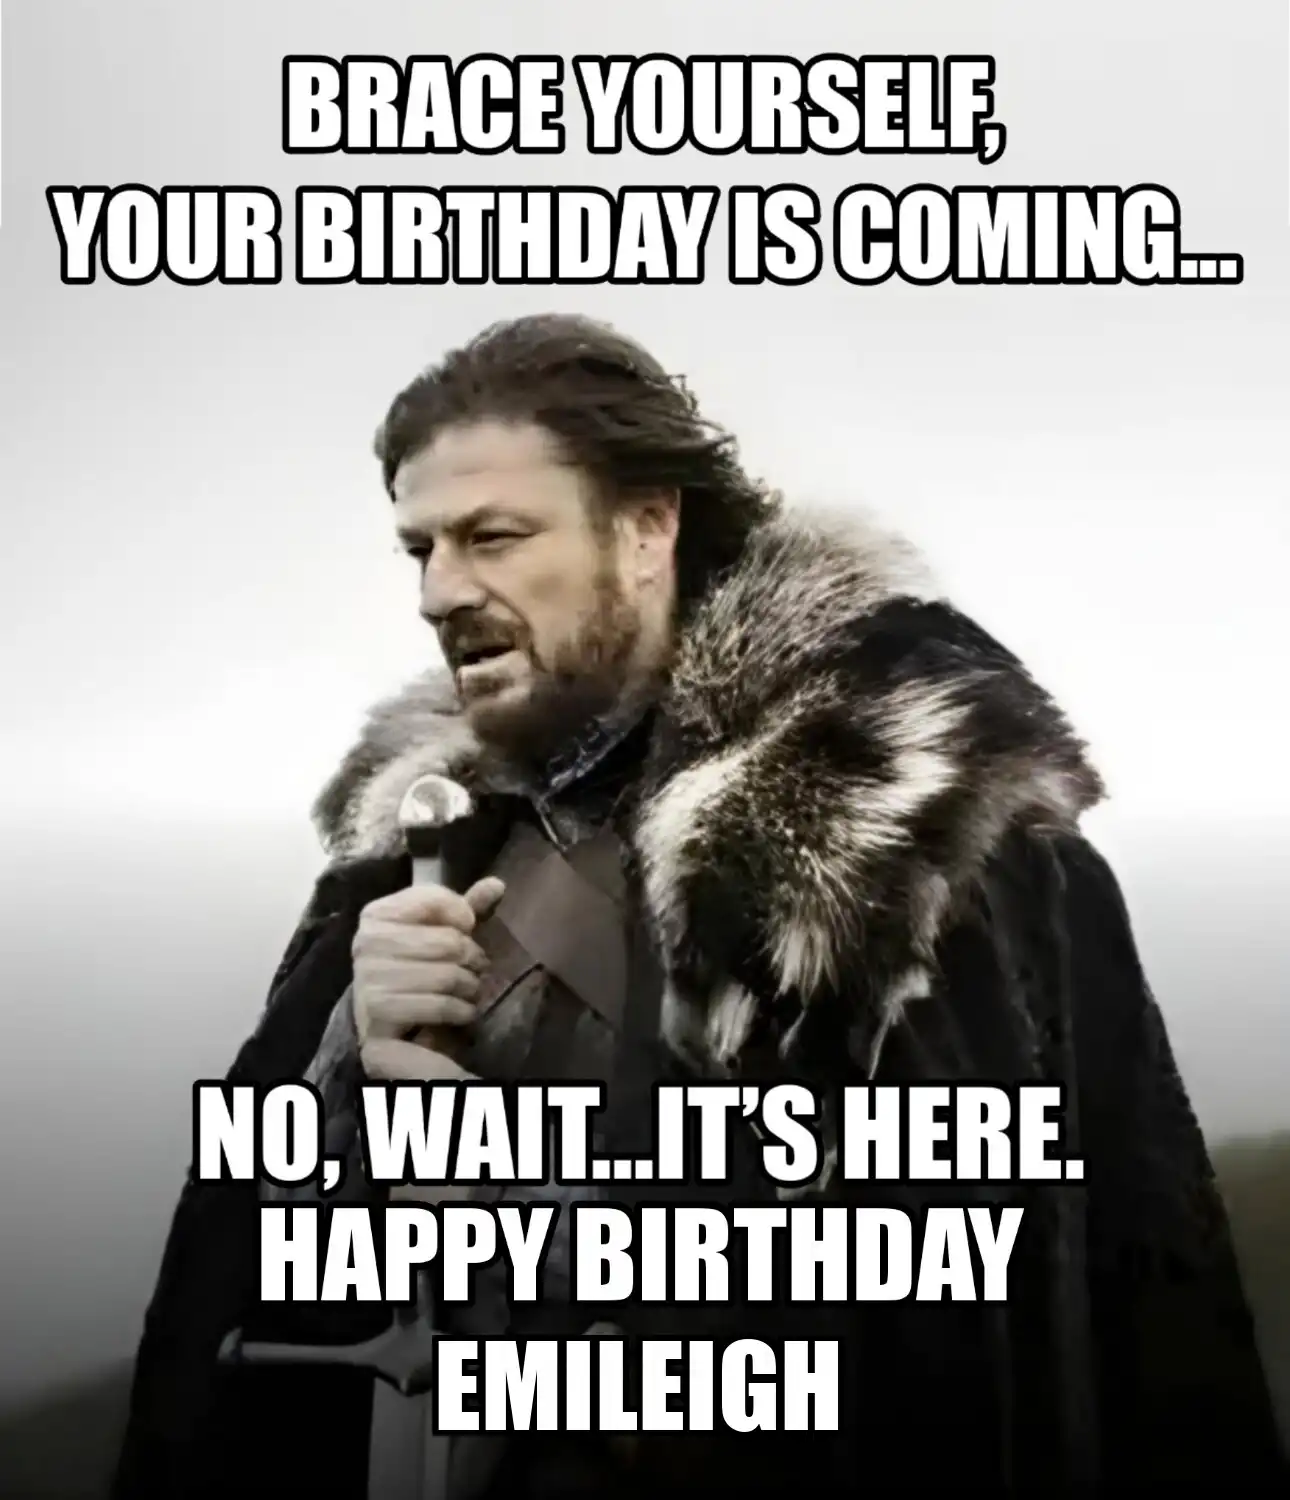 Happy Birthday Emileigh Brace Yourself Your Birthday Is Coming Meme